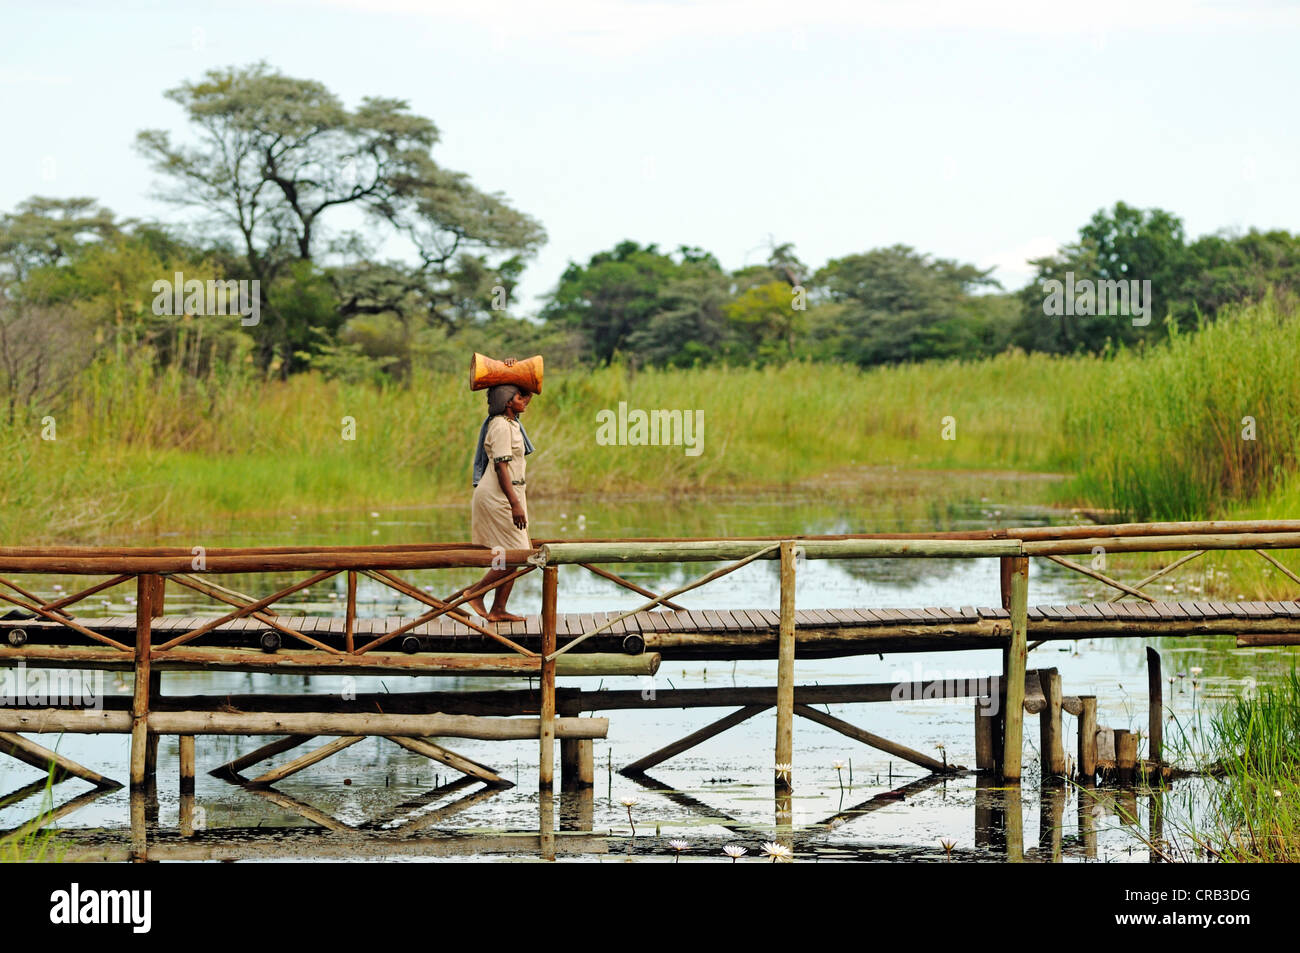 Woman with a load on her head on a bridge in Camp Kwando, lodge and campground on the Kwando River Stock Photo